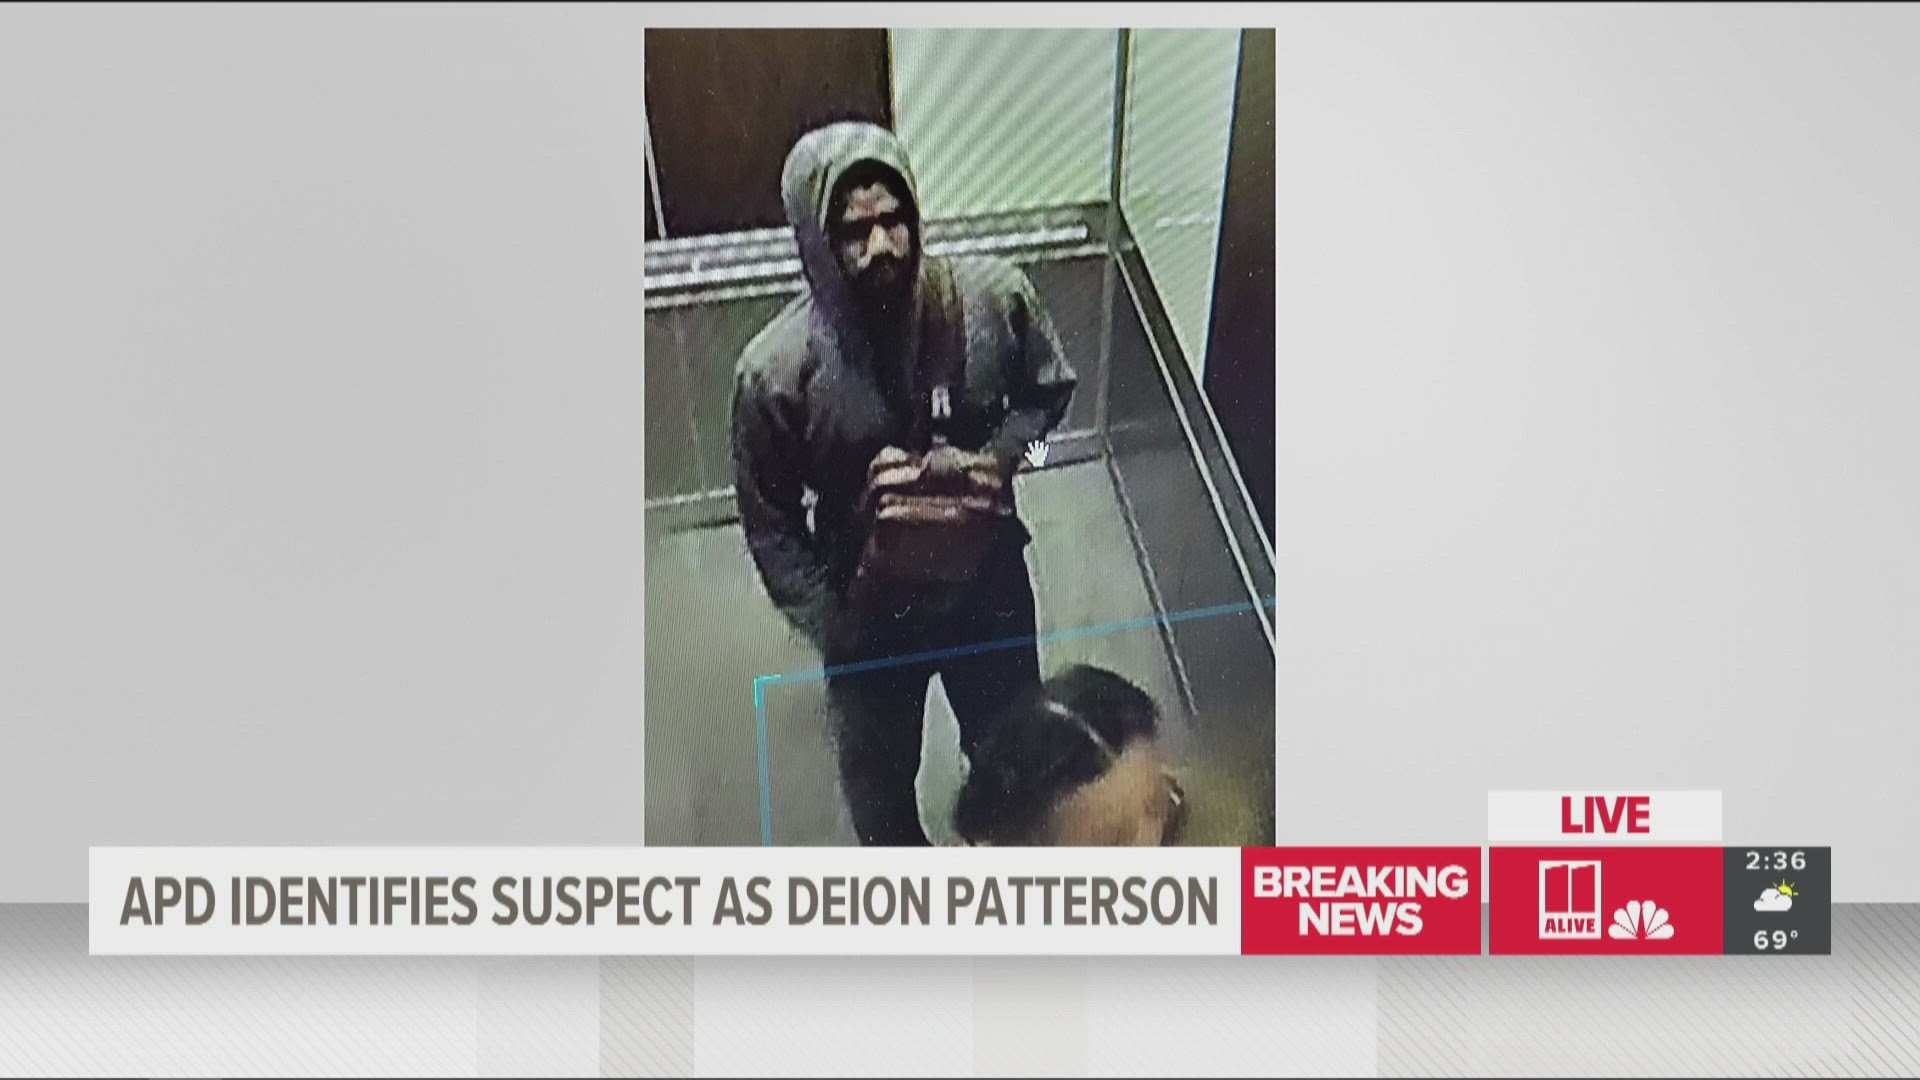 The suspect, identified as 24-year-old Deion Patterson, is currently at large.